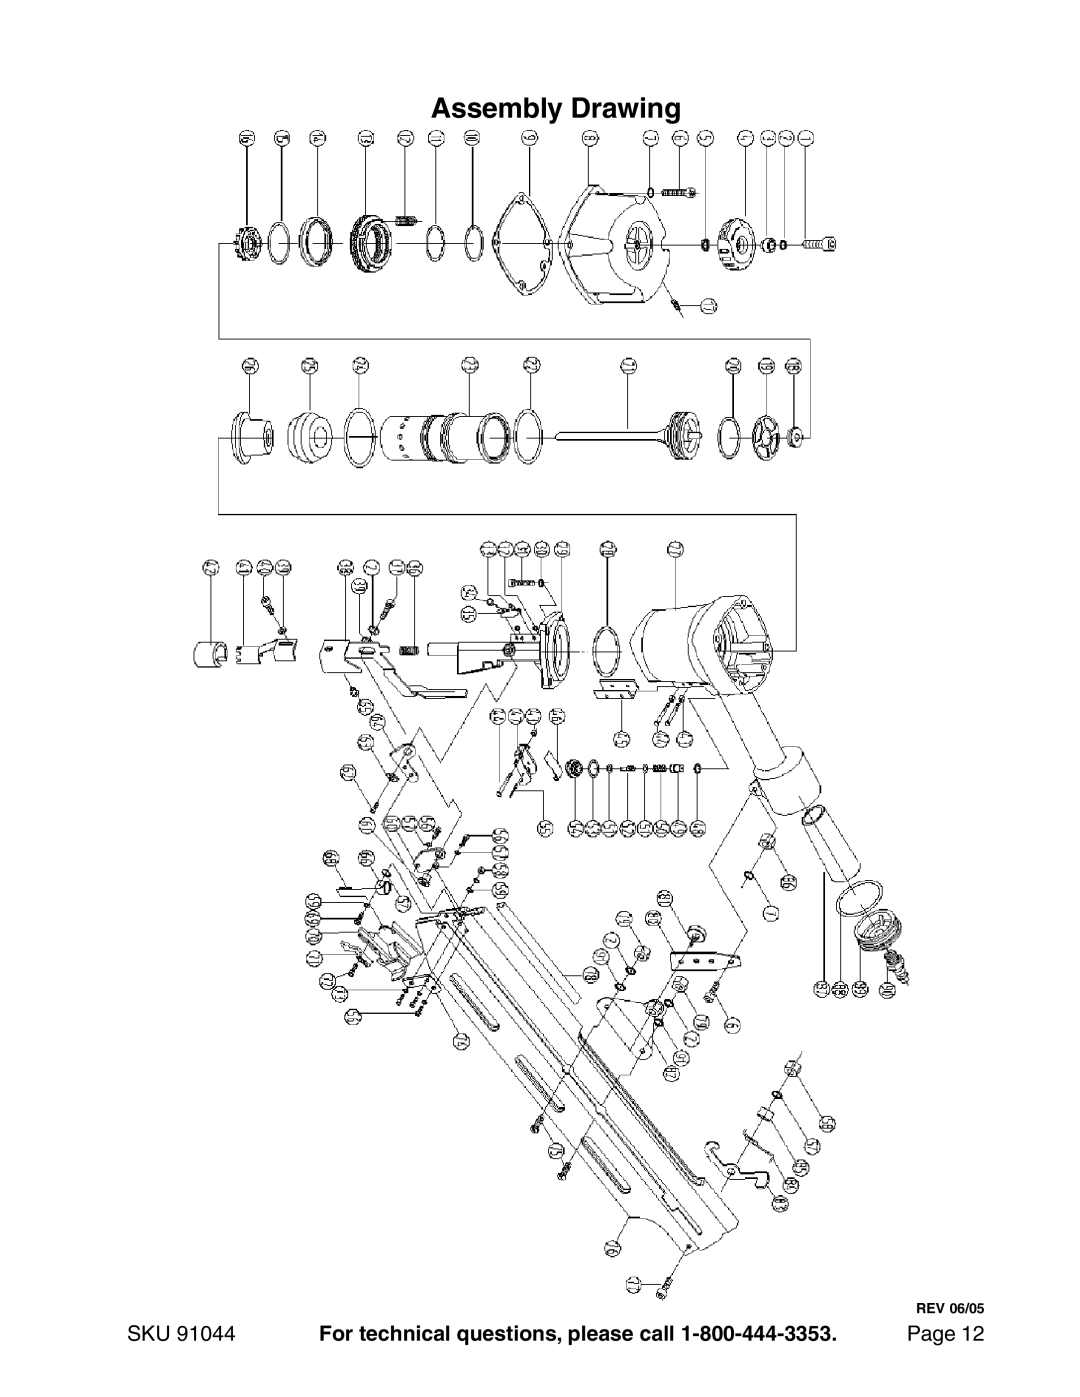 Harbor Freight Tools 91044 operating instructions Assembly Drawing, For technical questions, please call, REV 06/05 